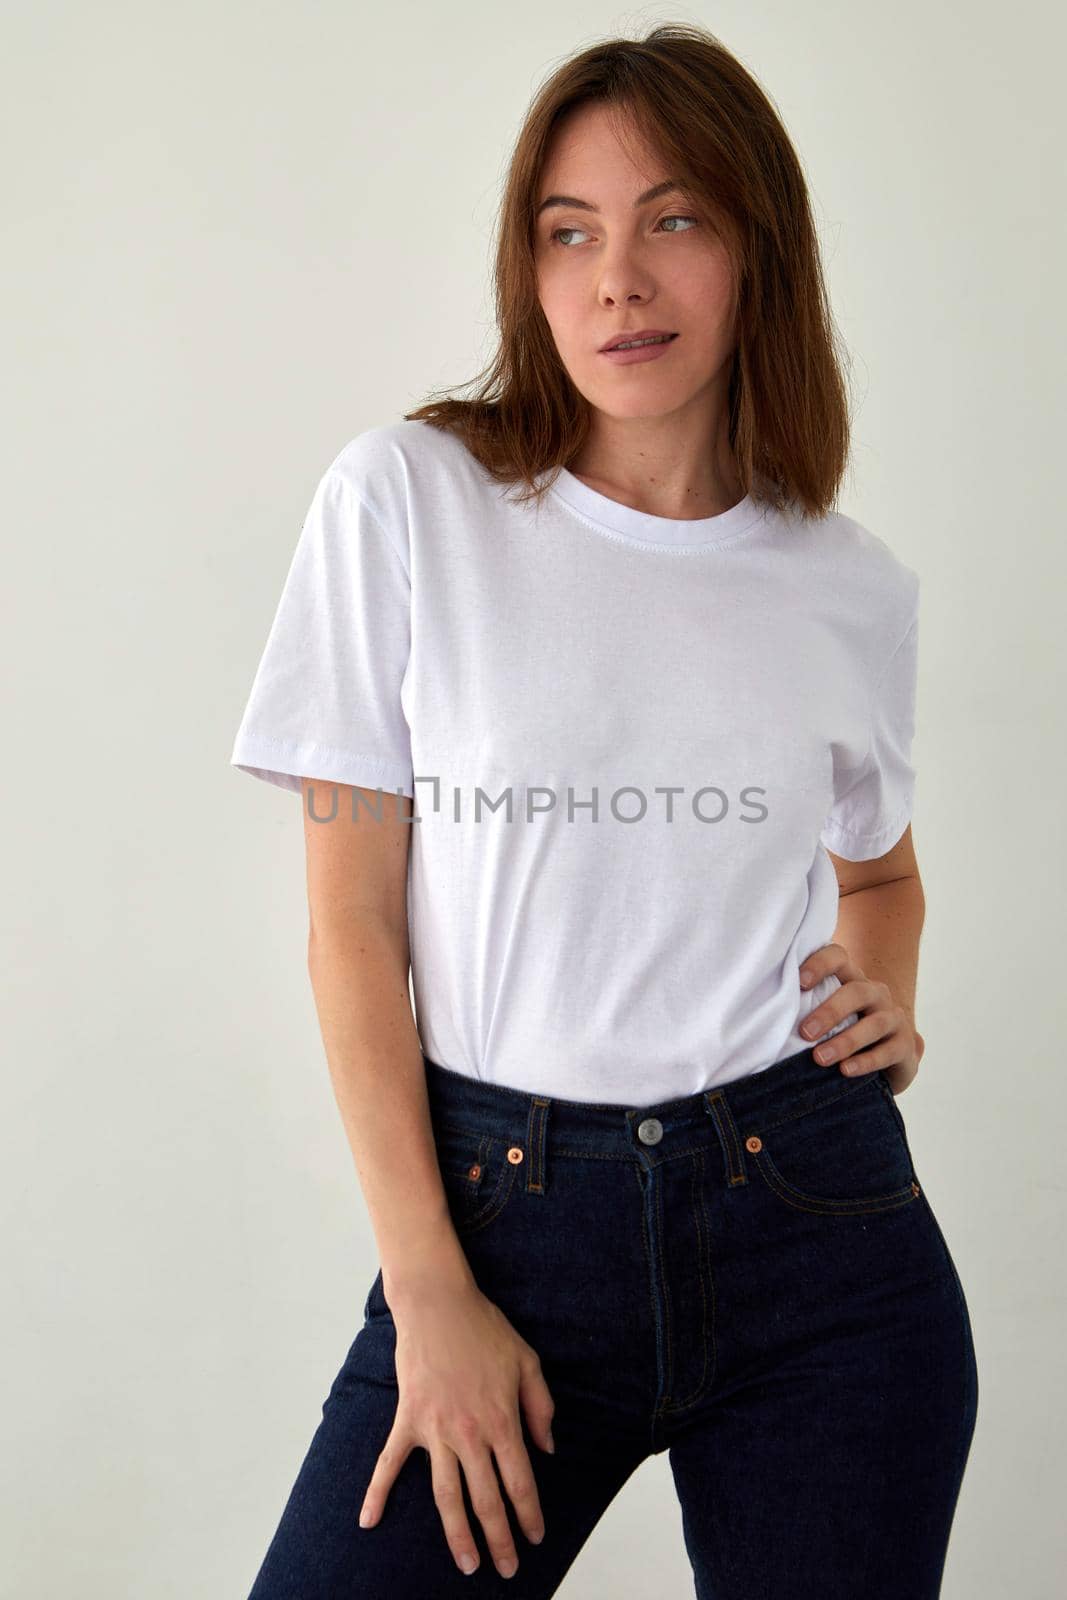 Cute woman in casual outfit standing in studio by Demkat